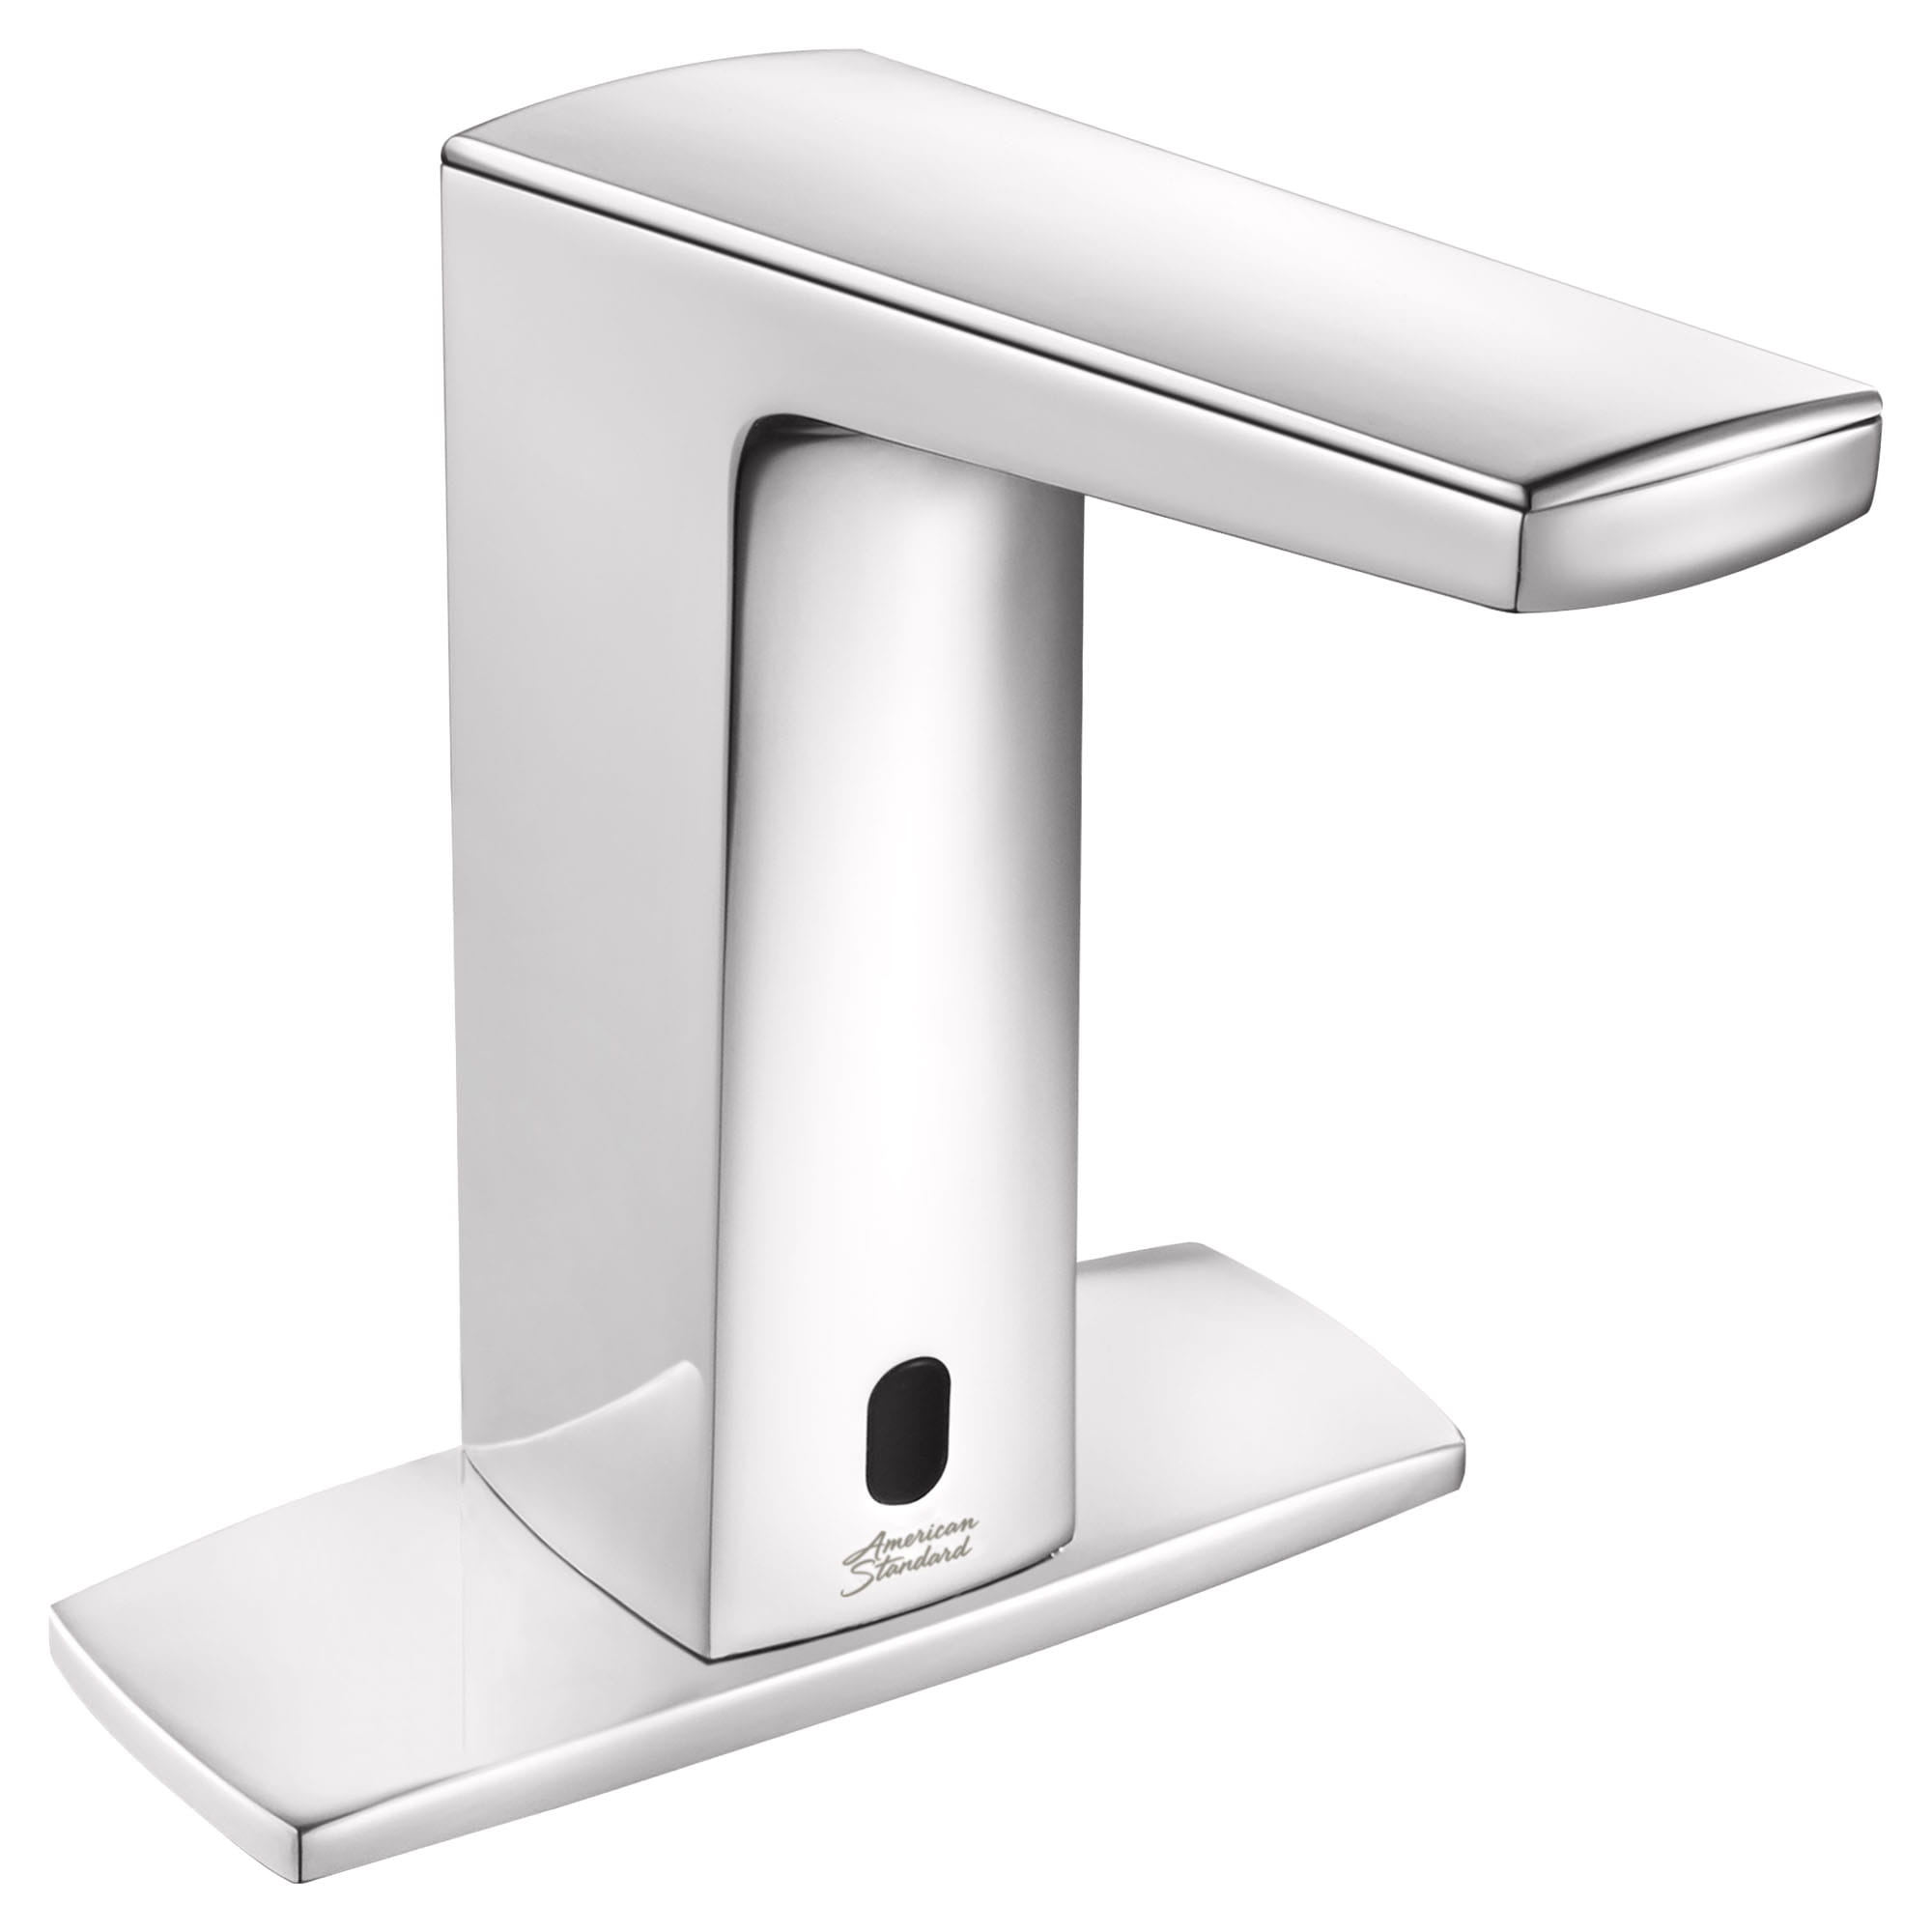 Paradigm® Selectronic® Touchless Faucet, Battery-Powered With SmarTherm Safety Shut-Off + ADM, 0.35 gpm/1.3 Lpm